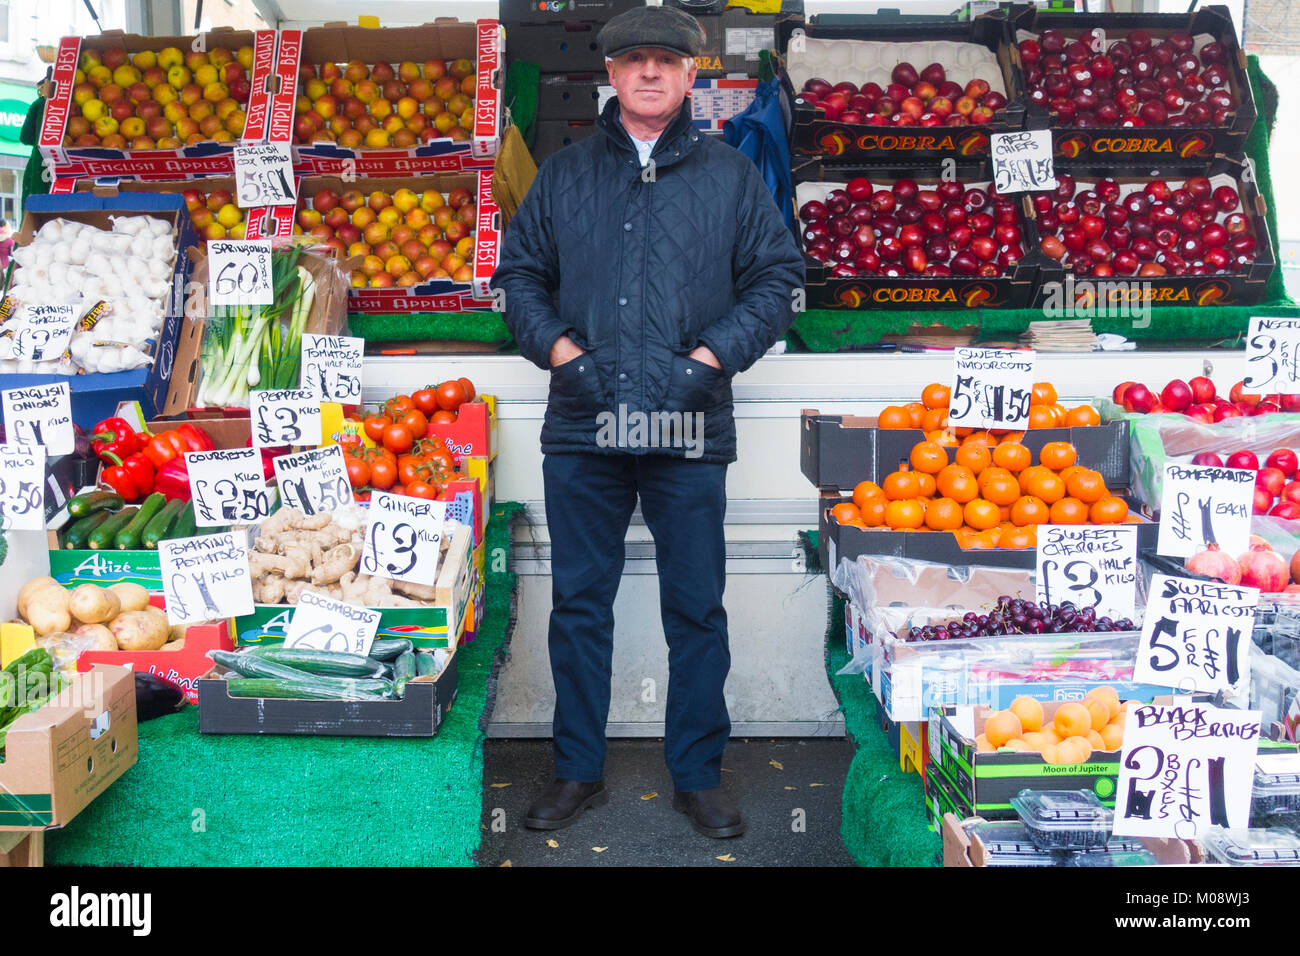 A fruit and veg street trader Stock Photo